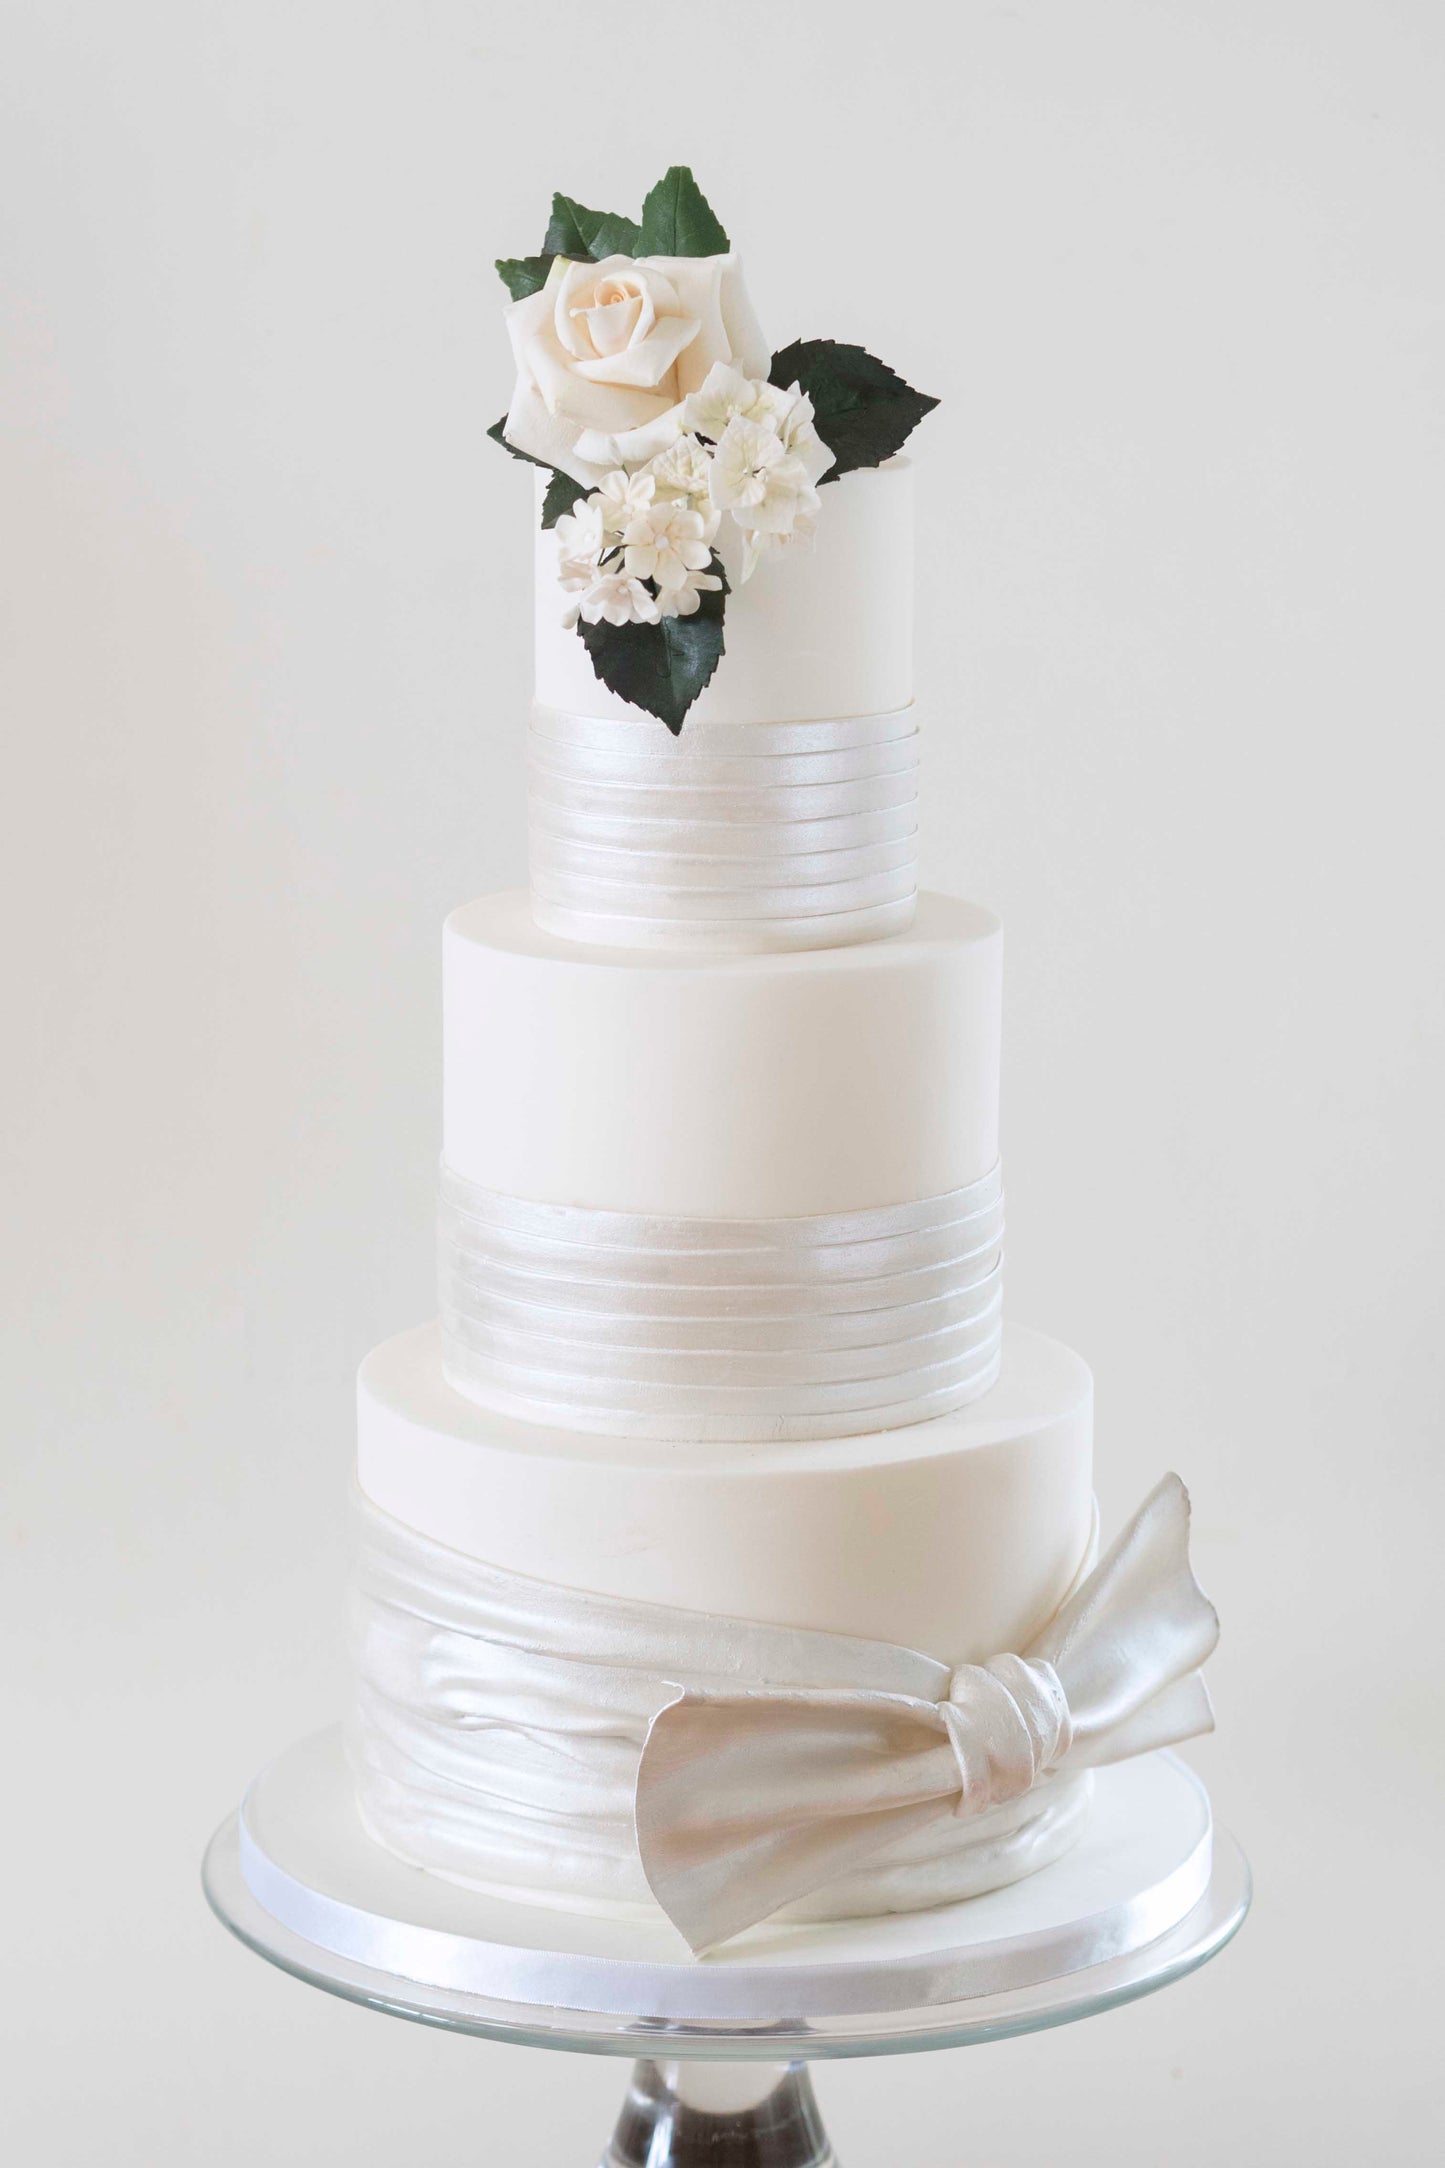 Three tier ivory wedding cake partially wrapped with pearlescent satin effect sugarpaste, topped with a white sugar rose